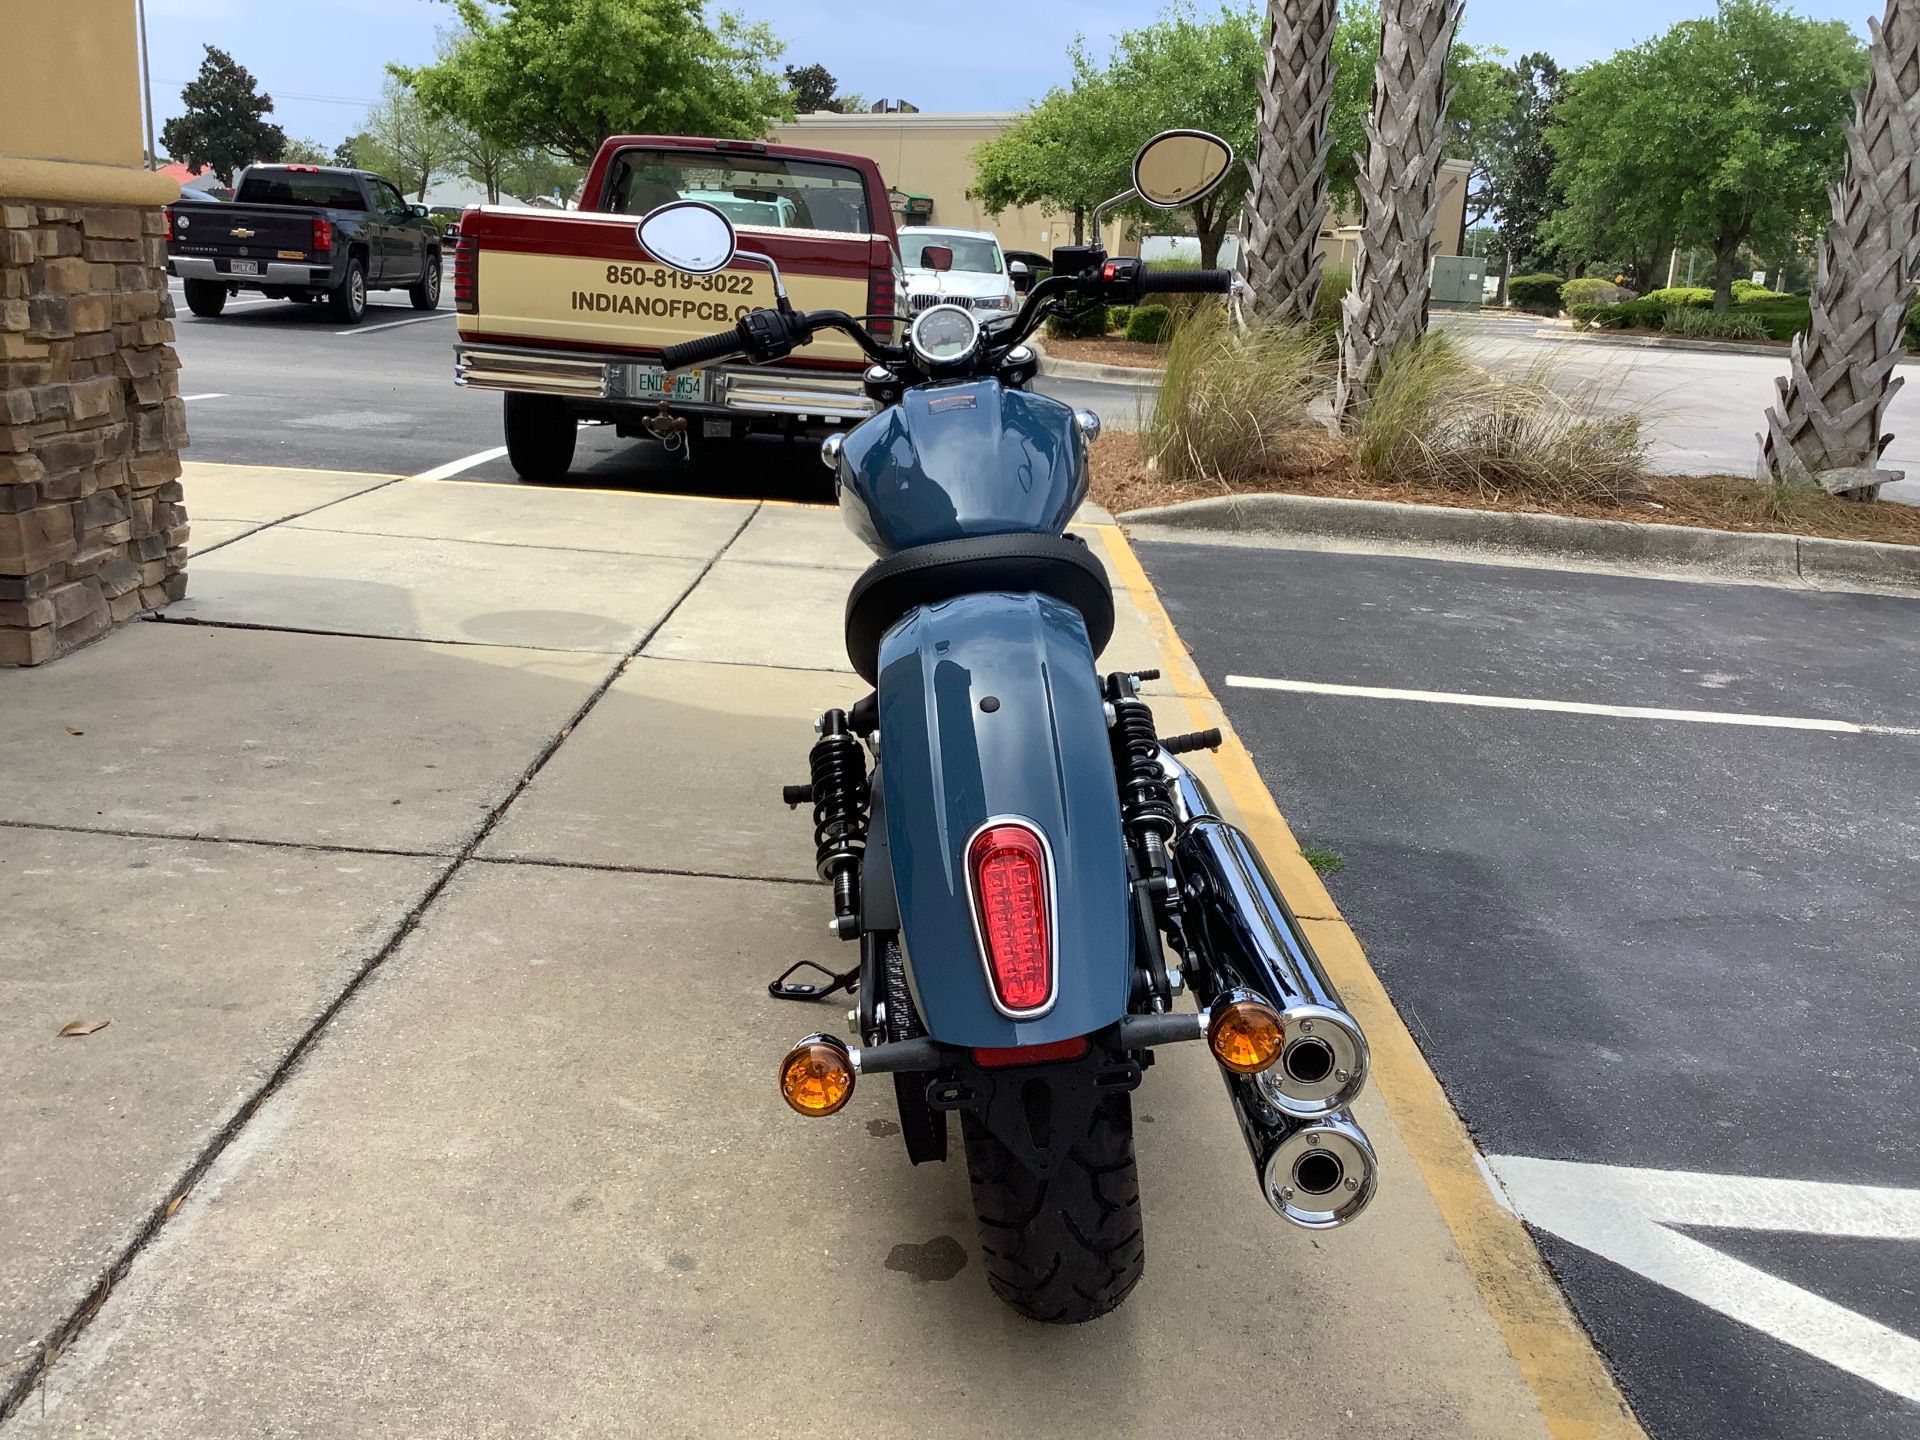 2022 Indian SCOUT 60 in Panama City Beach, Florida - Photo 7